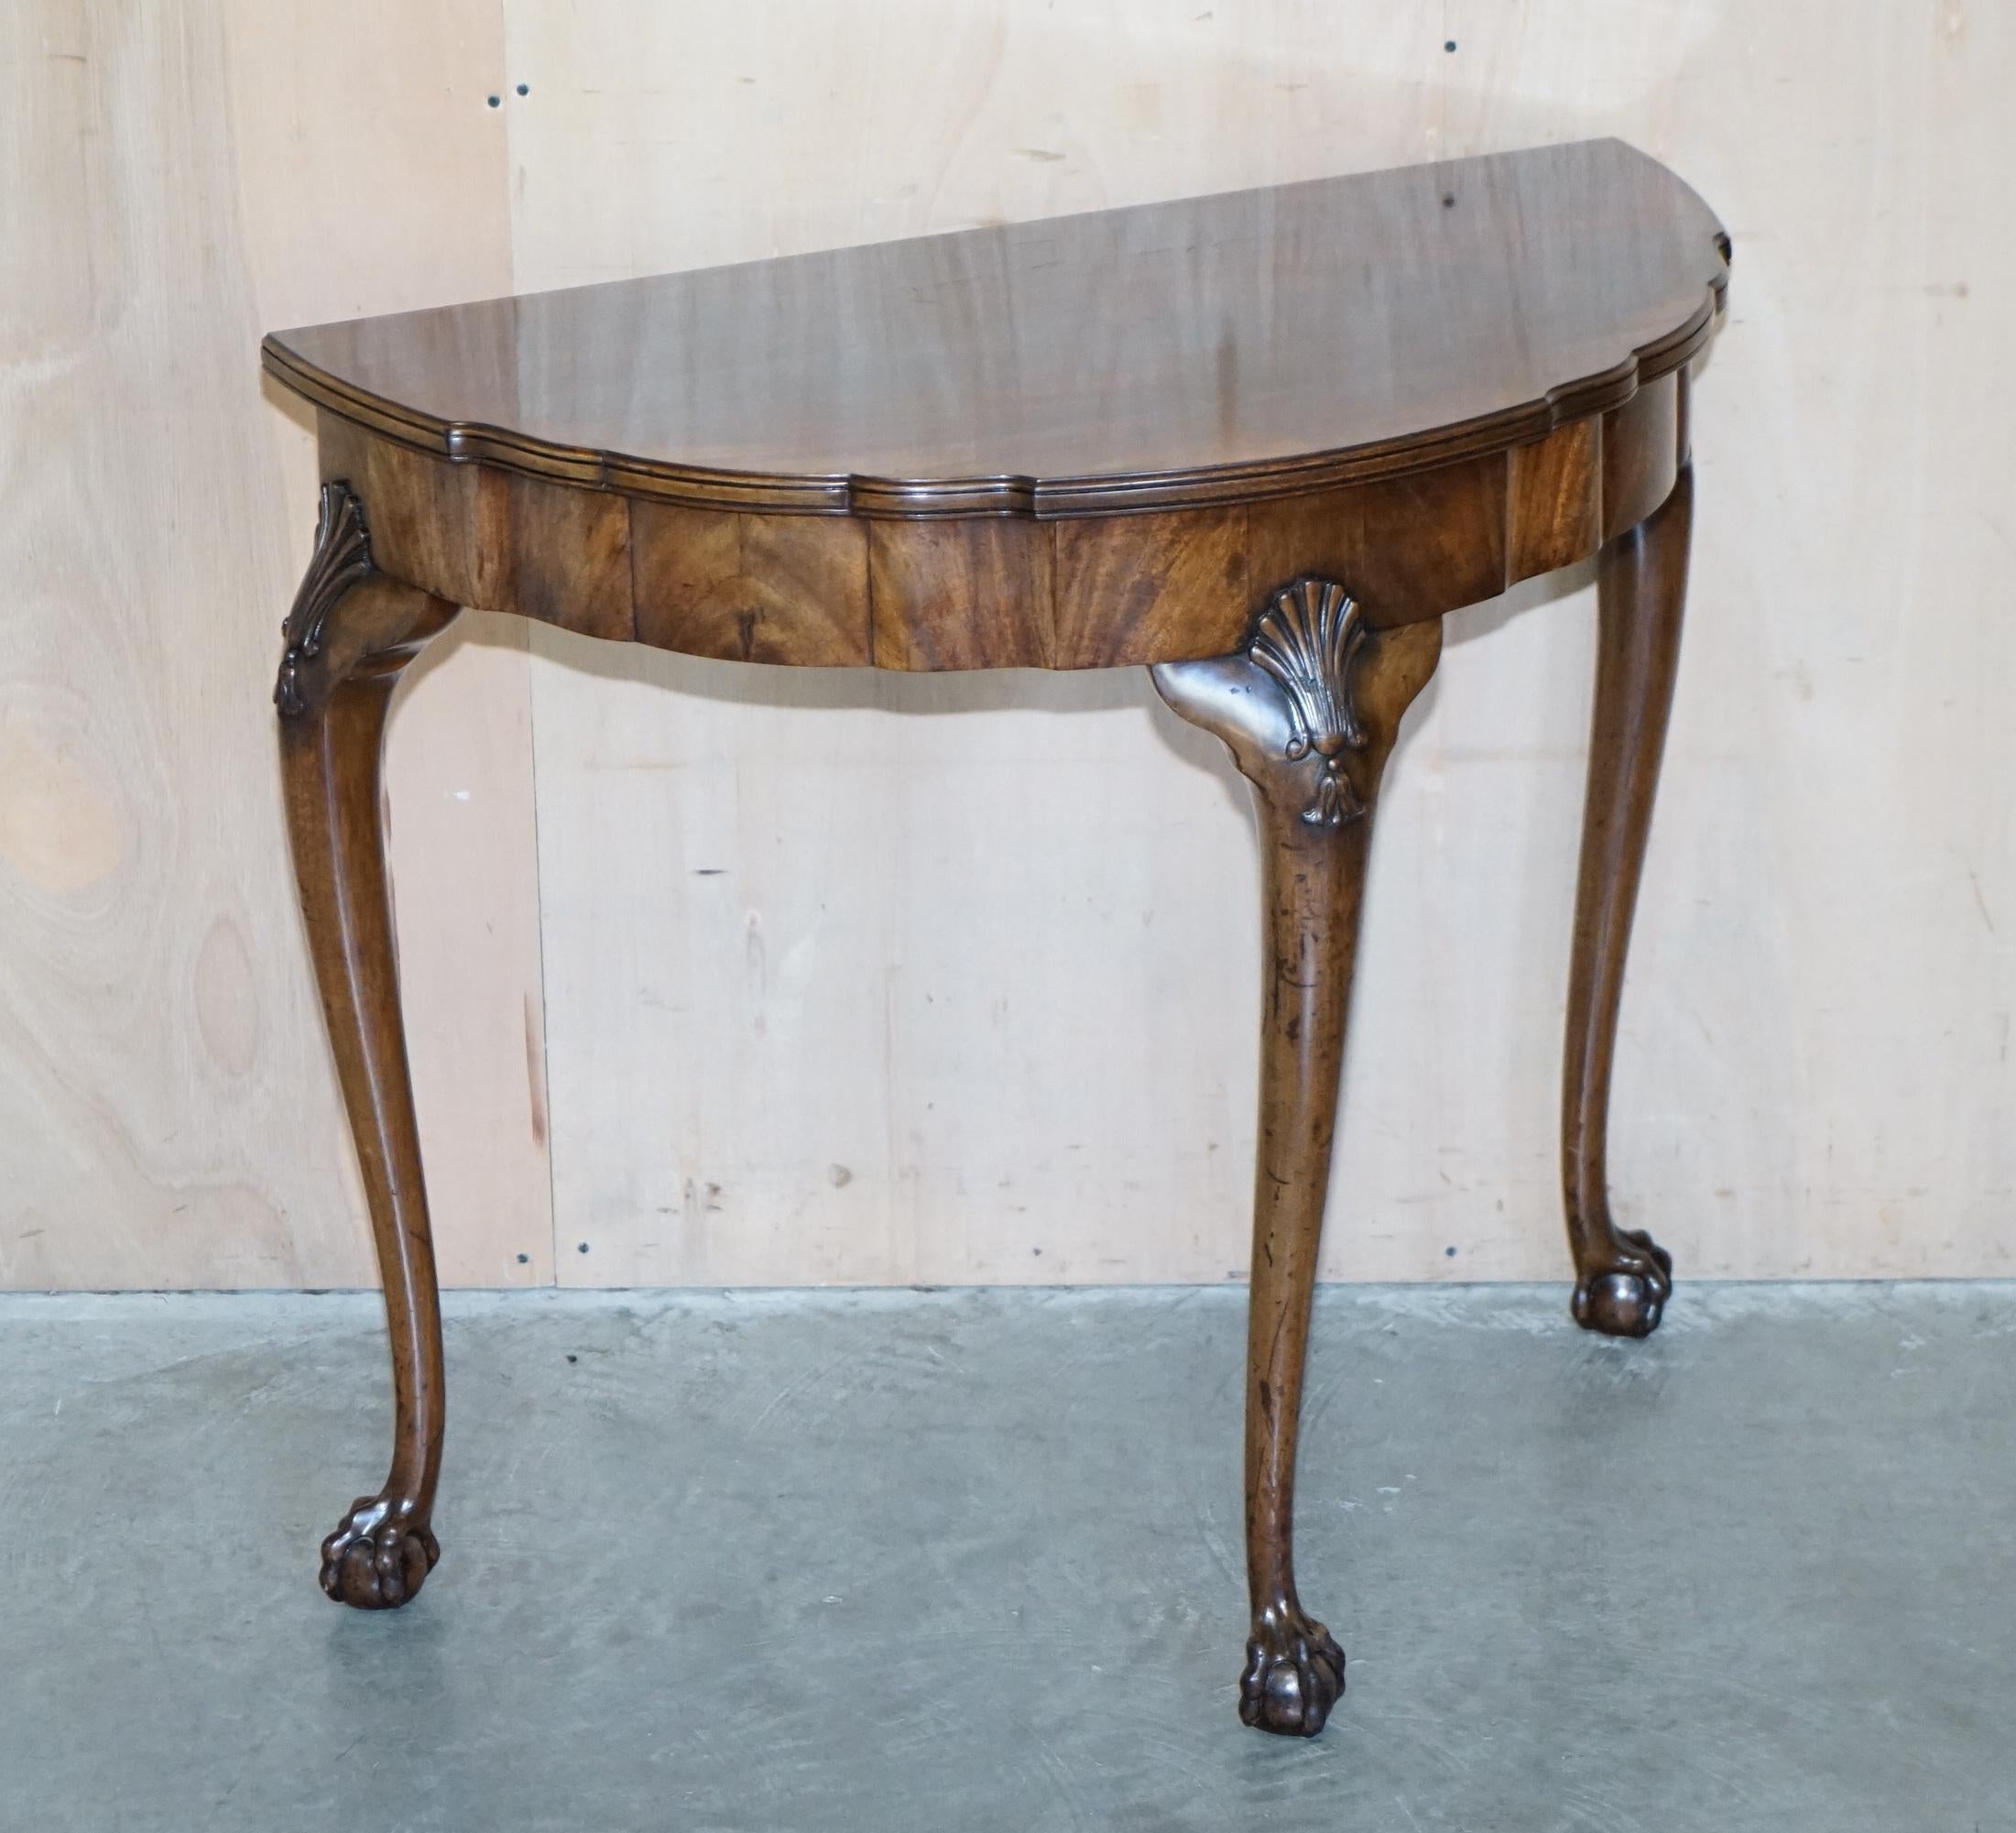 Royal House Antiques

Royal House Antiques is delighted to offer for sale this lovely antique circa 1920 Flamed Mahogany demi lune console table with Claw & Ball legs in the Thomas Chippendale taste 

Please note the delivery fee listed is just a